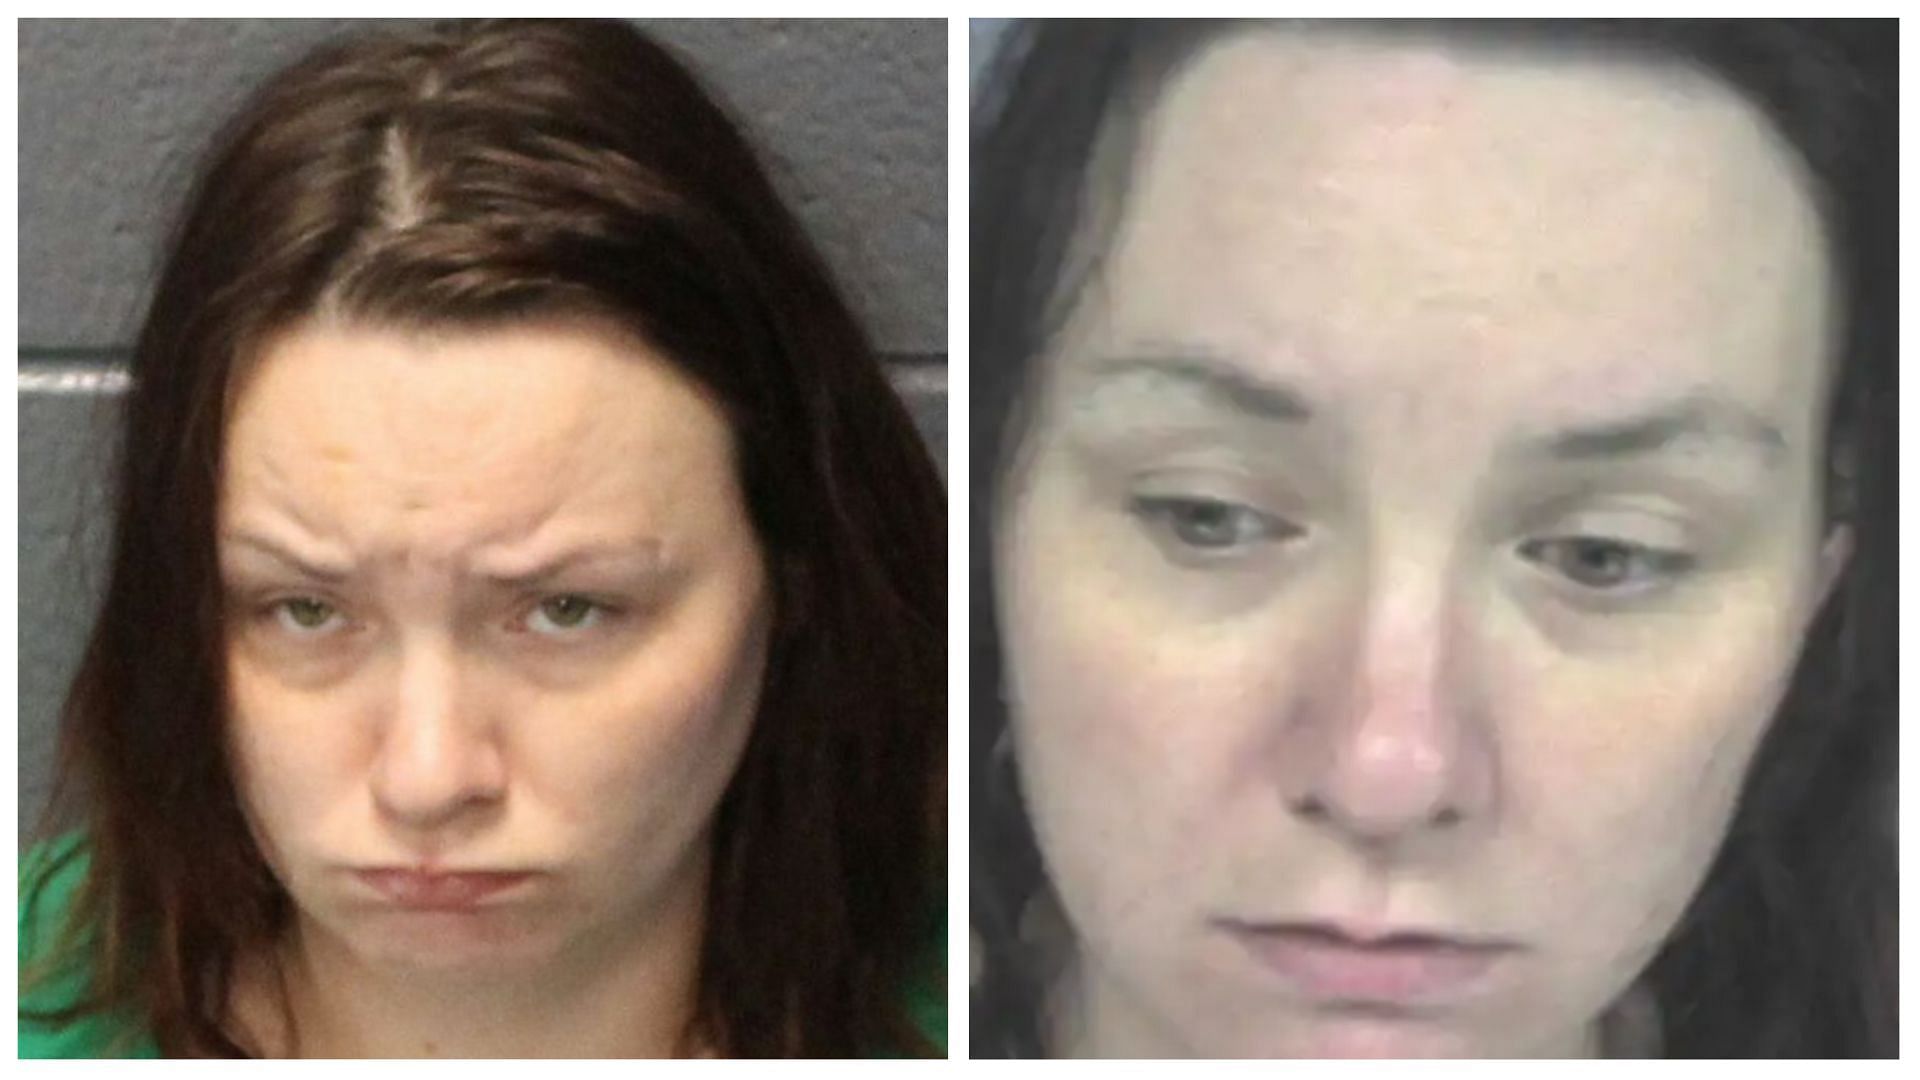 The Virginia Mother was sentenced to 55 years in prison (images via Hampton police department/ Julia Tomlin Facebook)